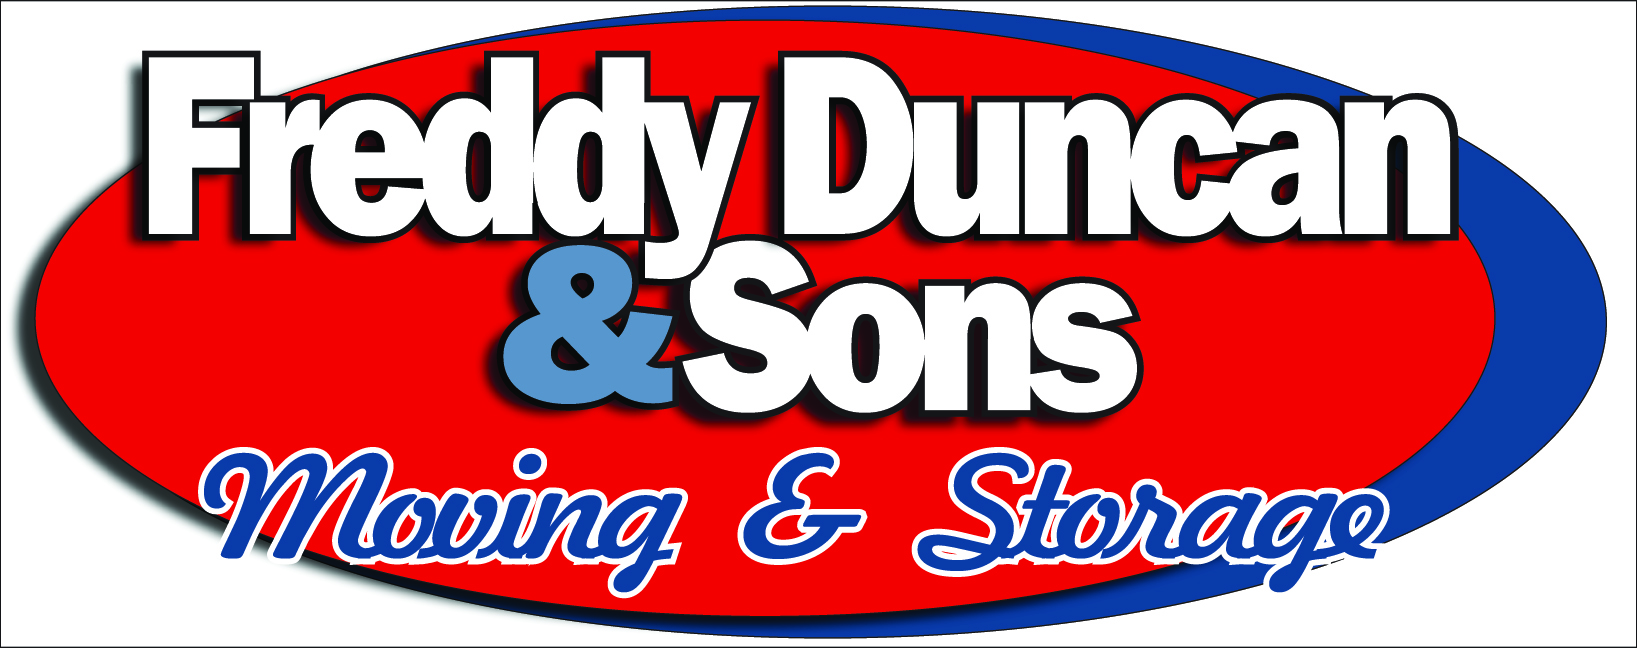 duncan and sons moving